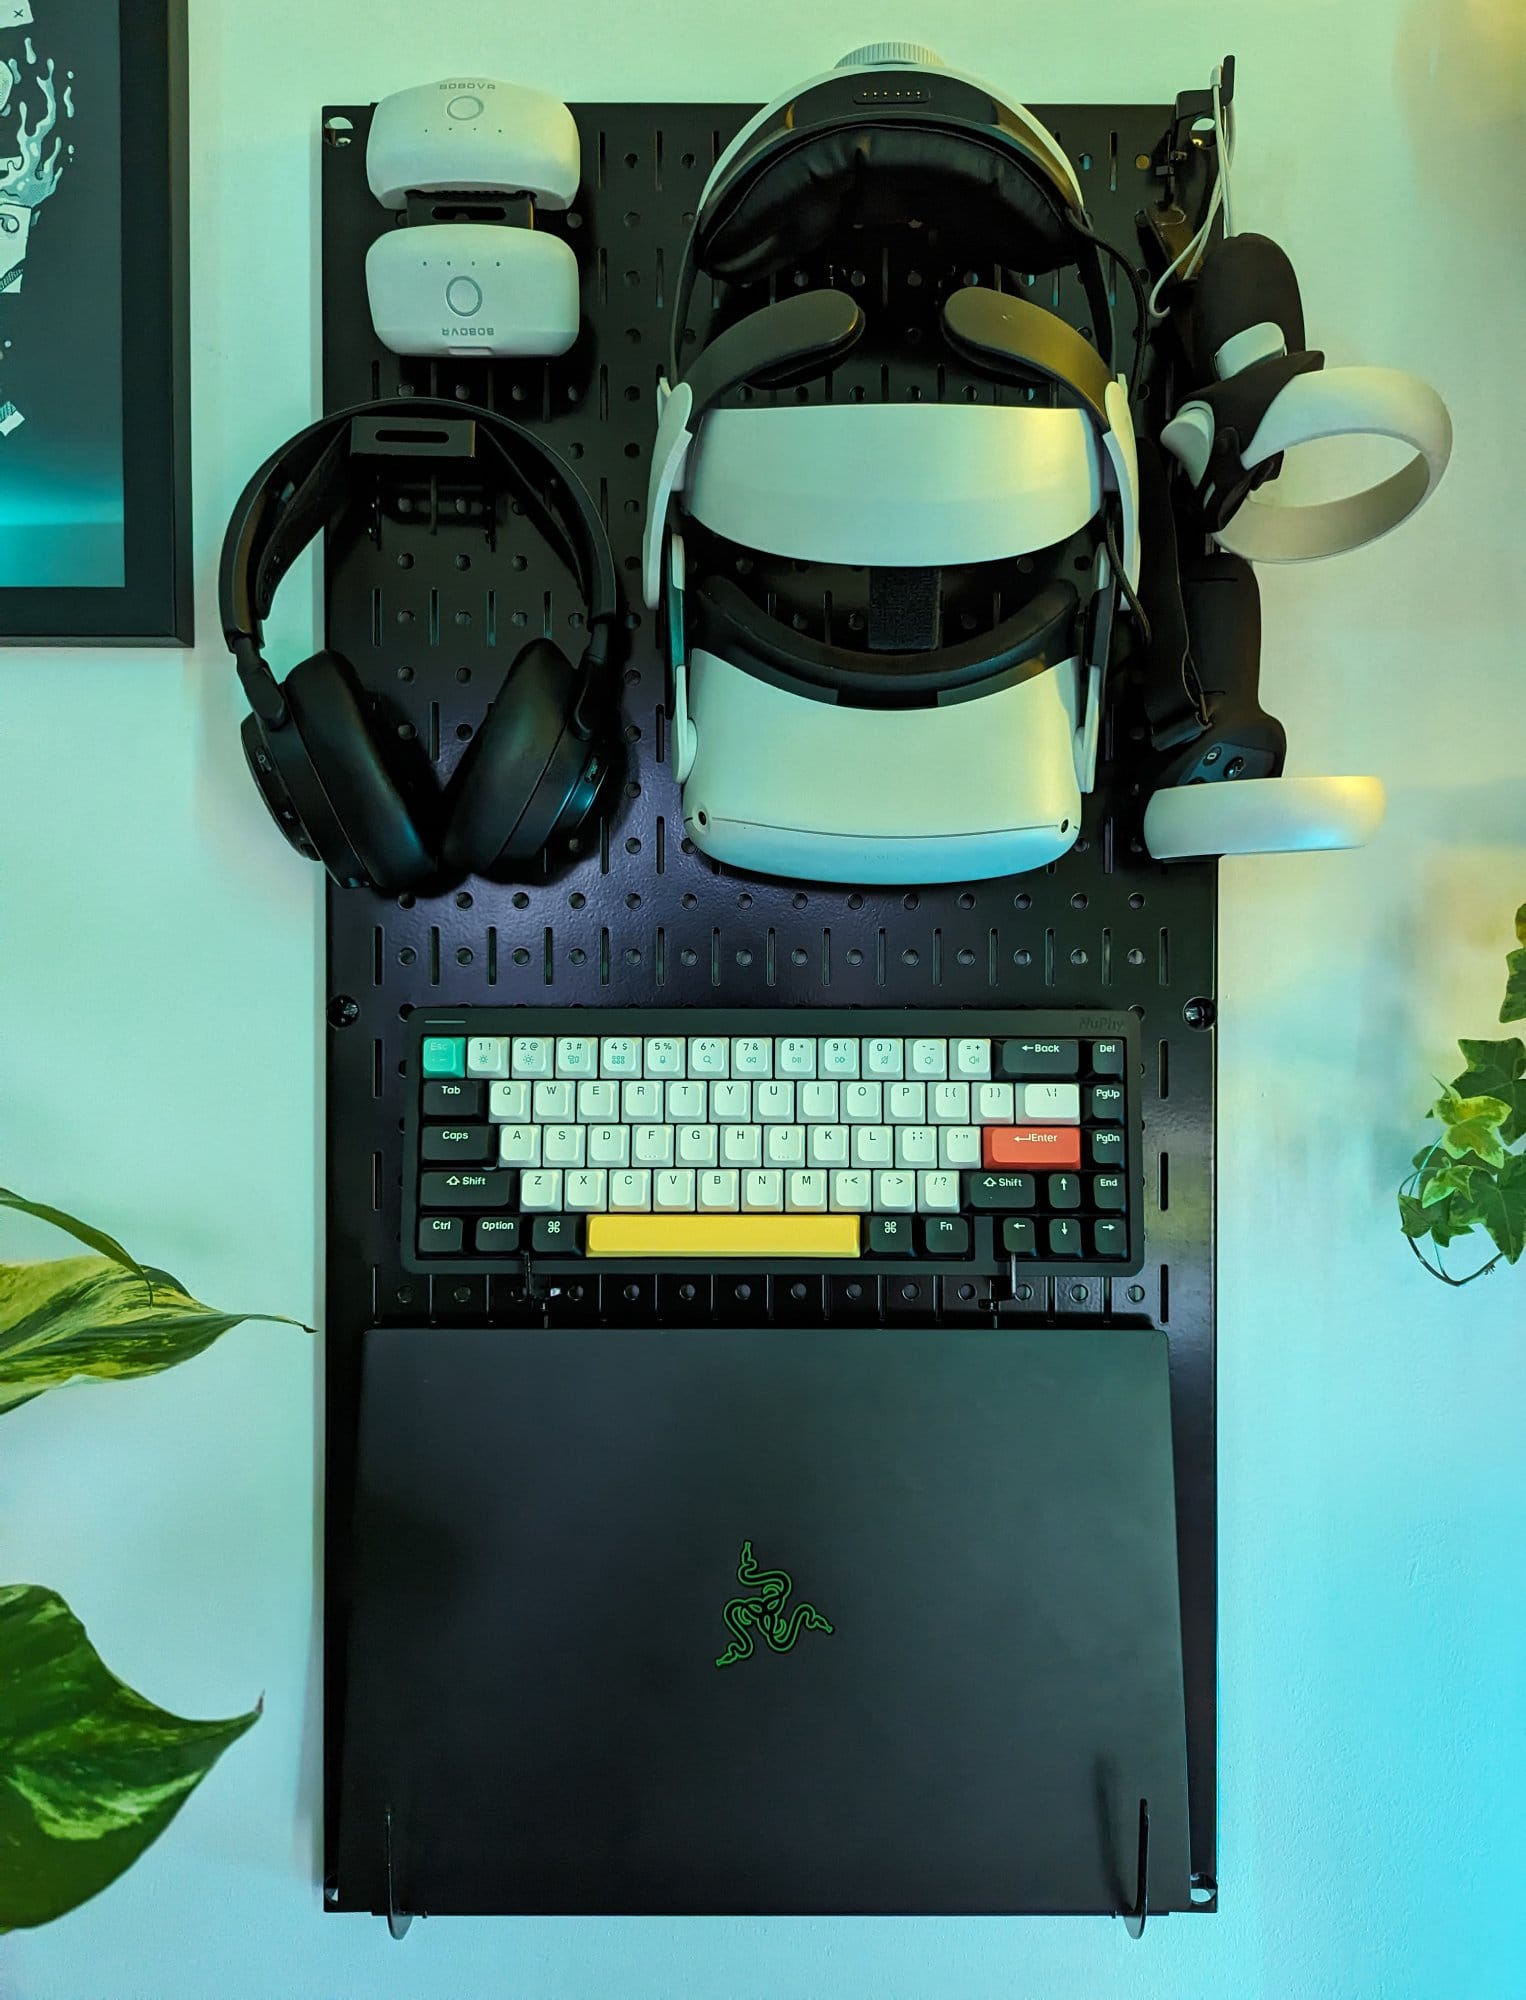 A pegboard organiser mounted on a wall, holding a VR headset, controllers, headphones, a mechanical keyboard, and a Razer laptop, with nearby green plants adding a touch of nature